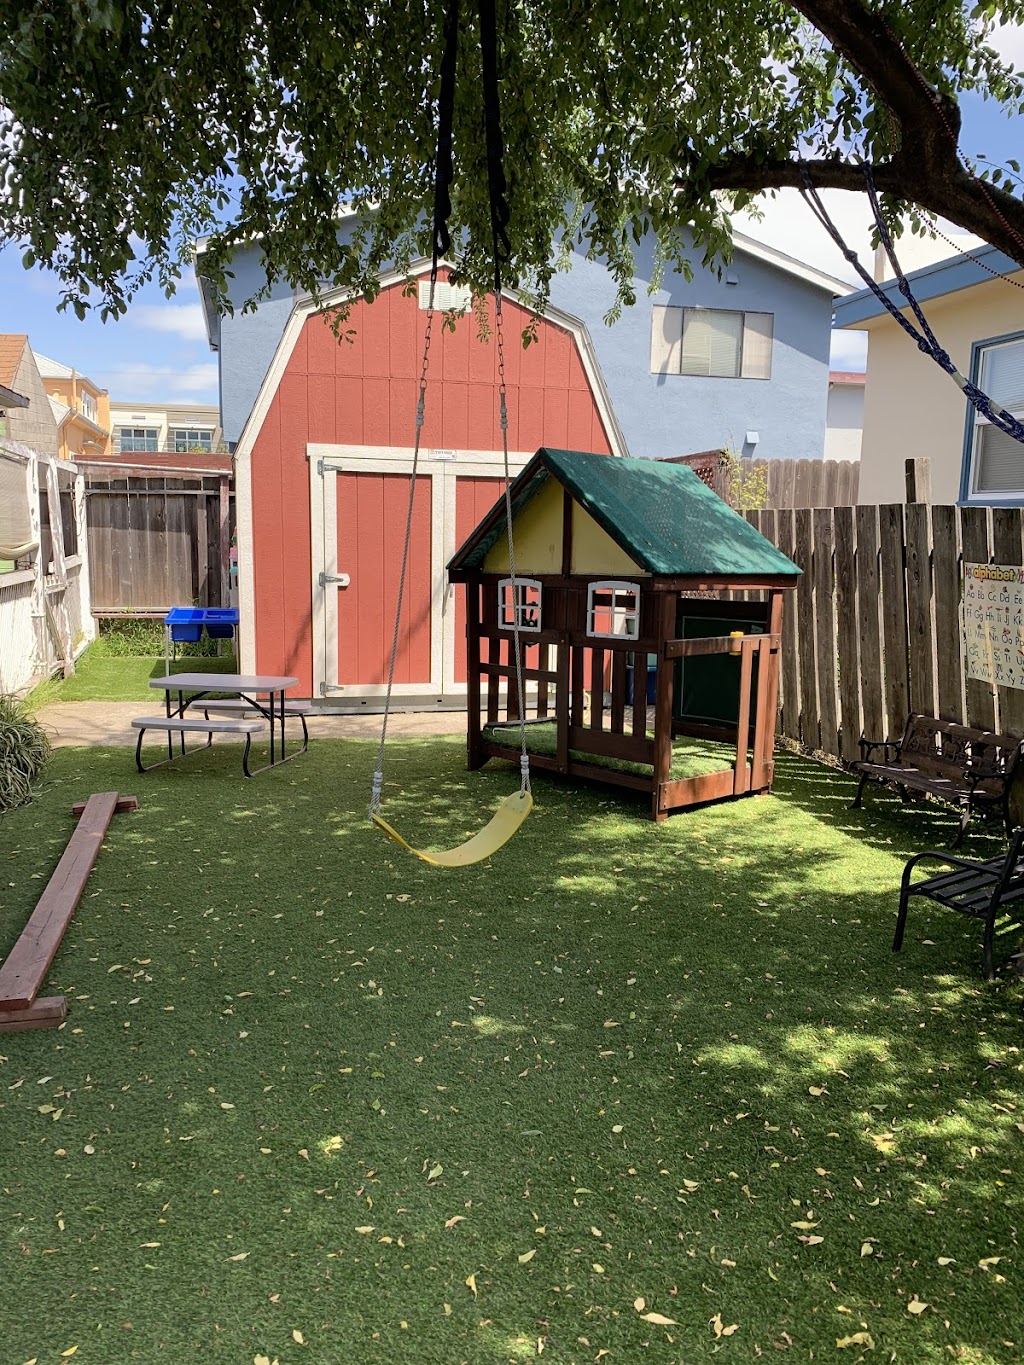 Little Lion Preschool and Childcare | 811 Central Ave, Alameda, CA 94501 | Phone: (510) 521-8190